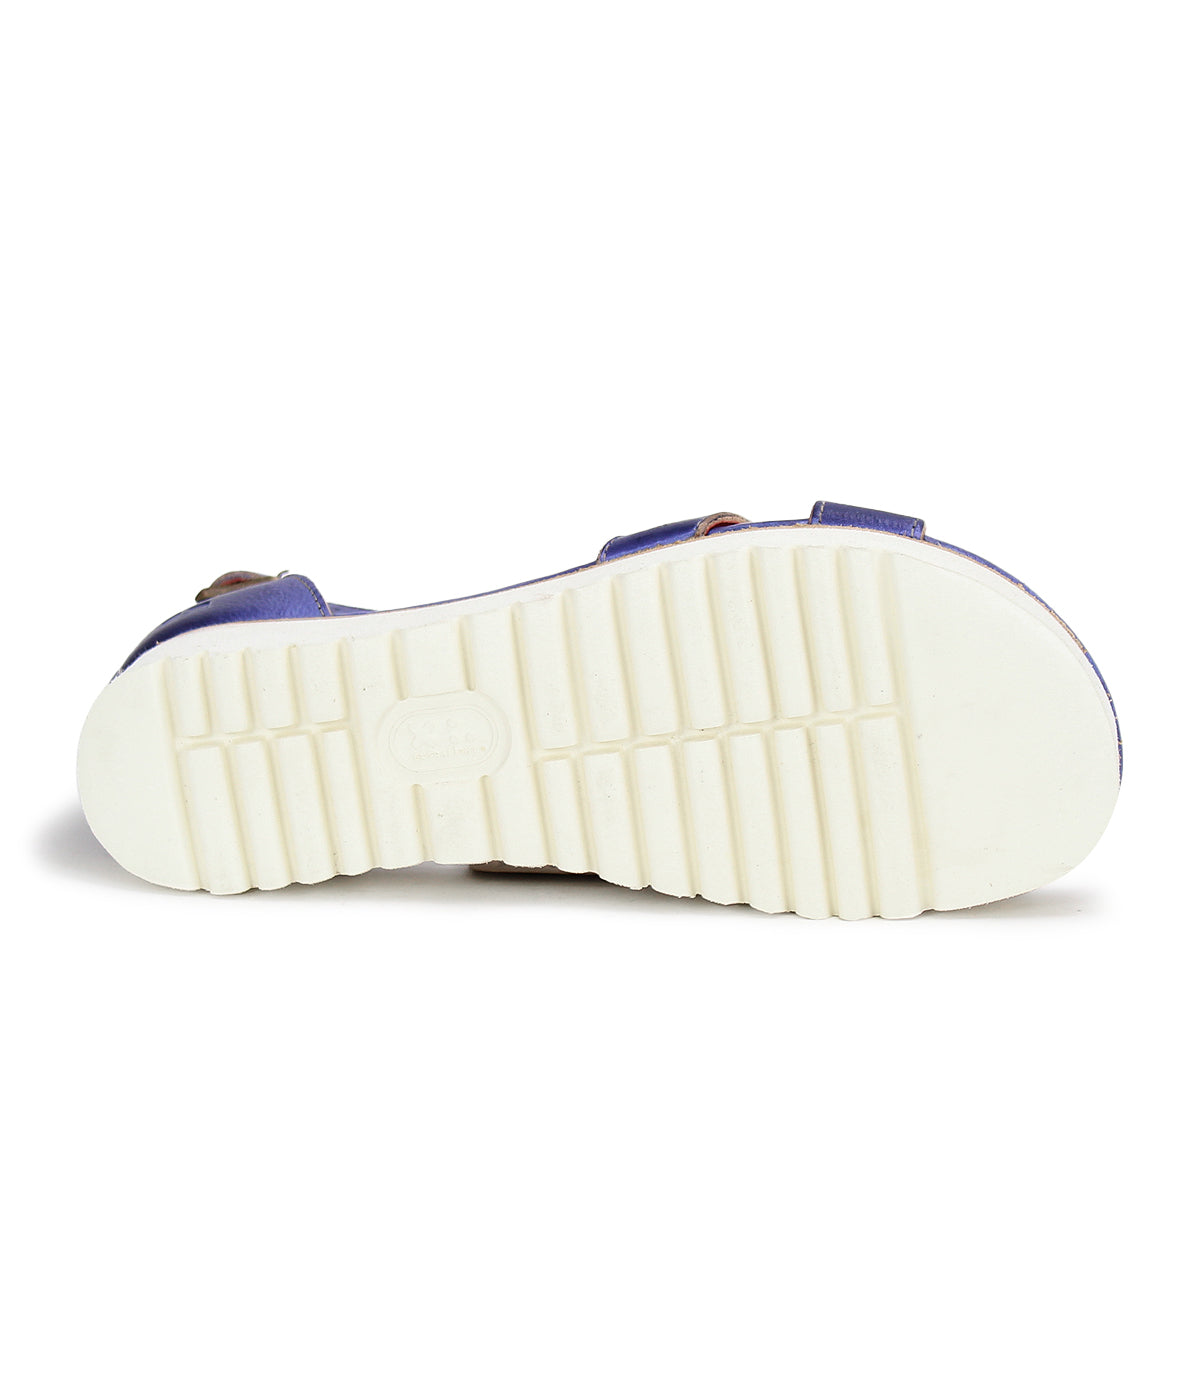 A pair of Carroll blue sandals with white soles on a white background, by Bed Stu.